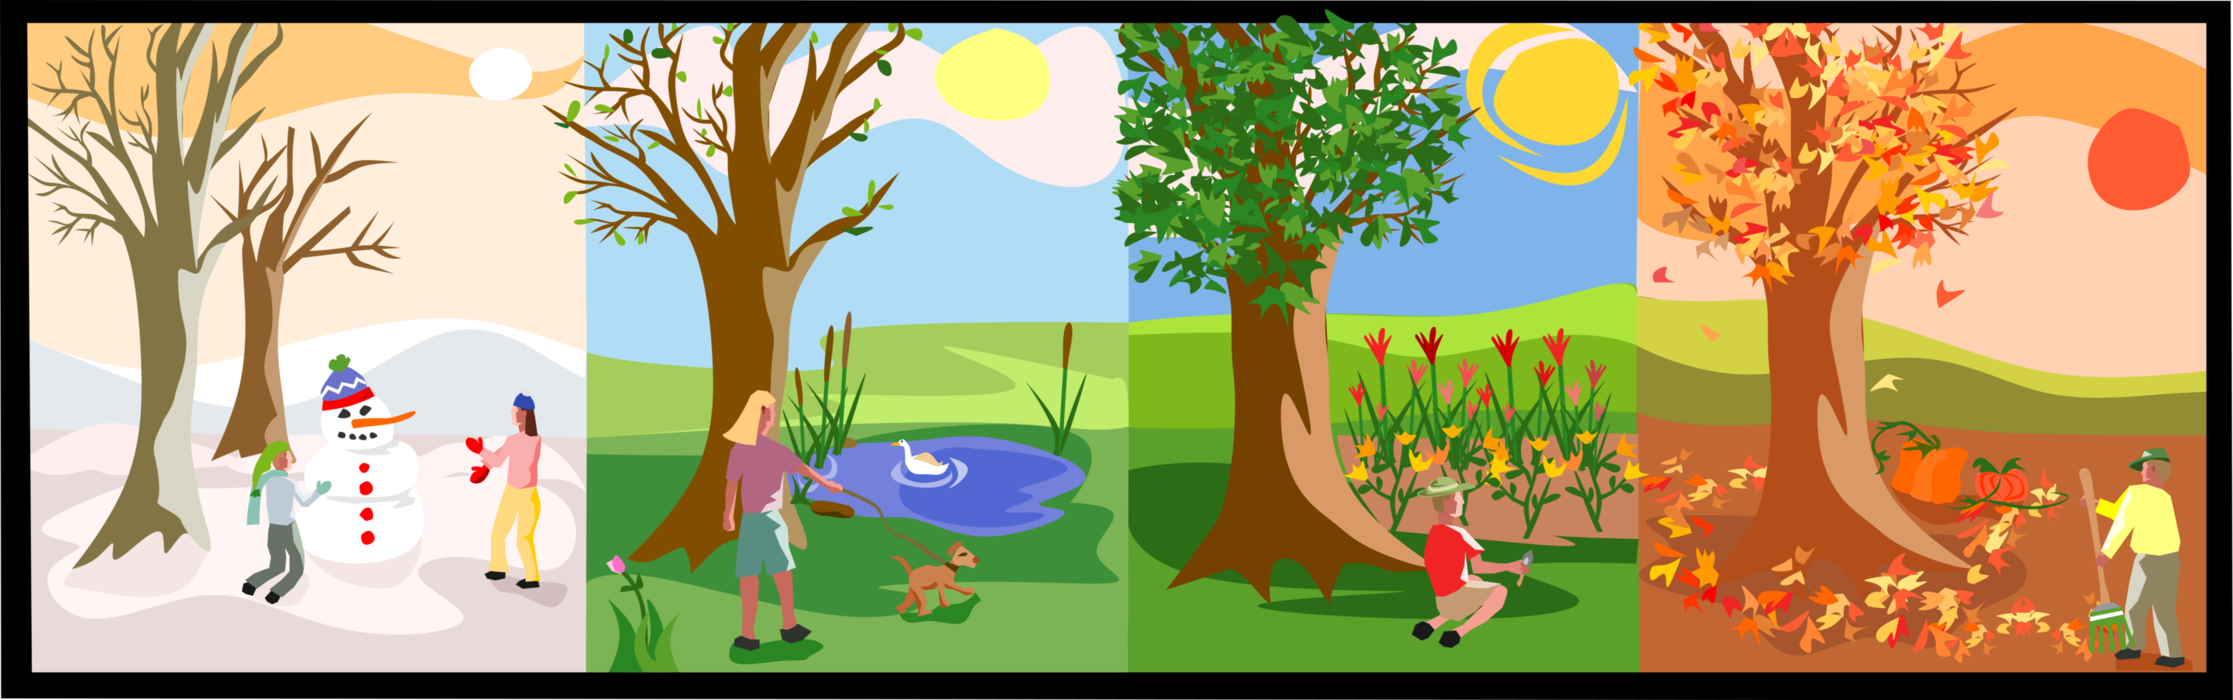 Vector Illustration of Activities Associated with Four Seasons of Spring, Summer, Fall and Winter